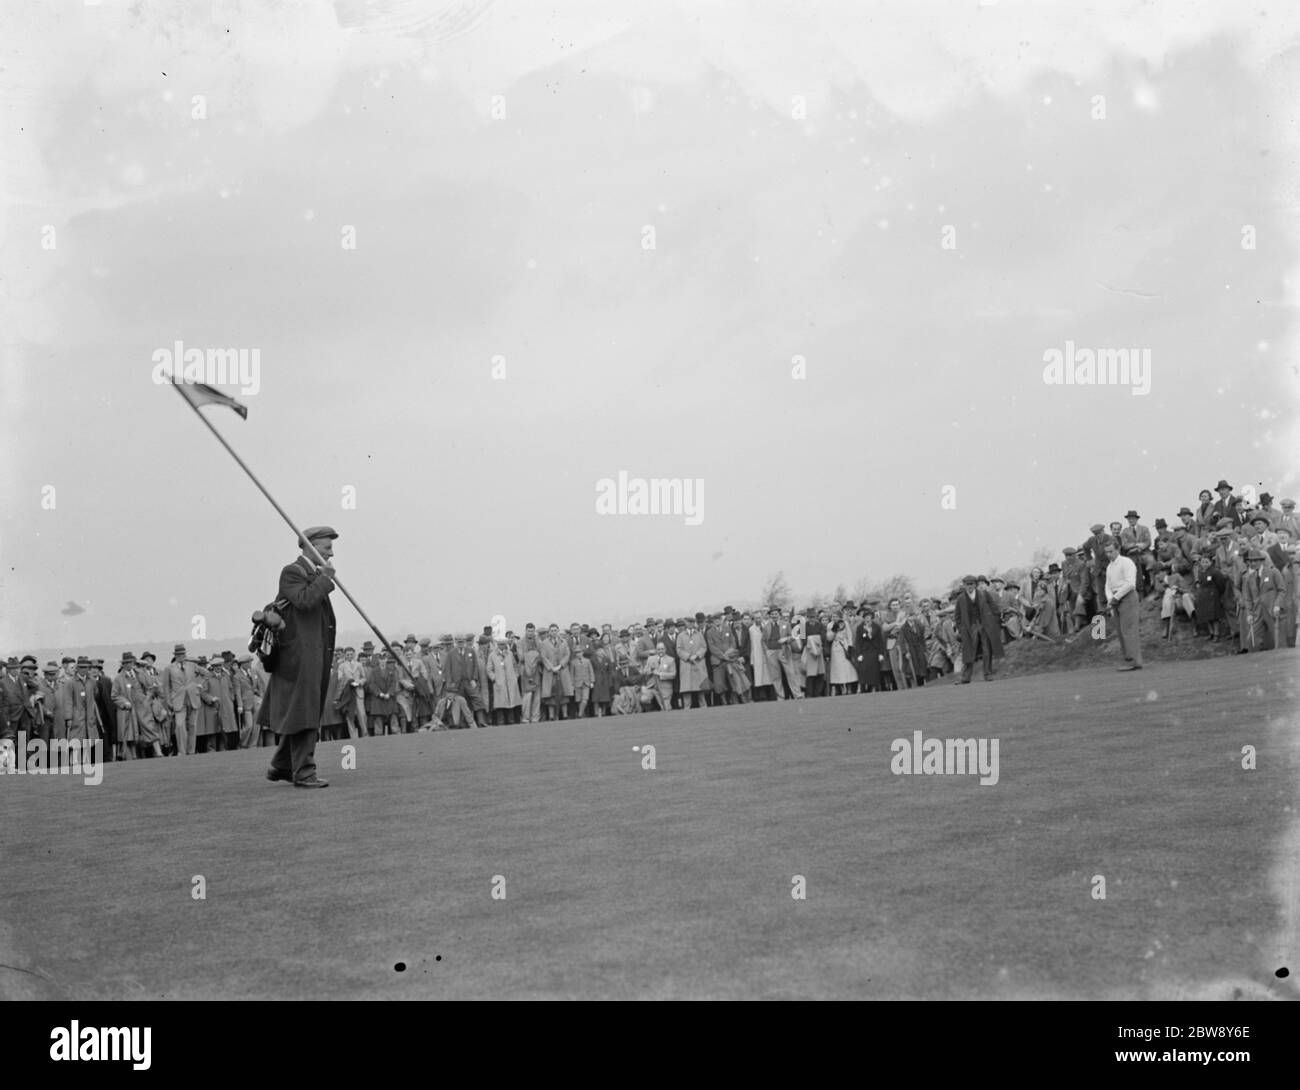 Sundridge park golf championship match . A player watches in hope as his ball roles towards the hole . 1936. Stock Photo